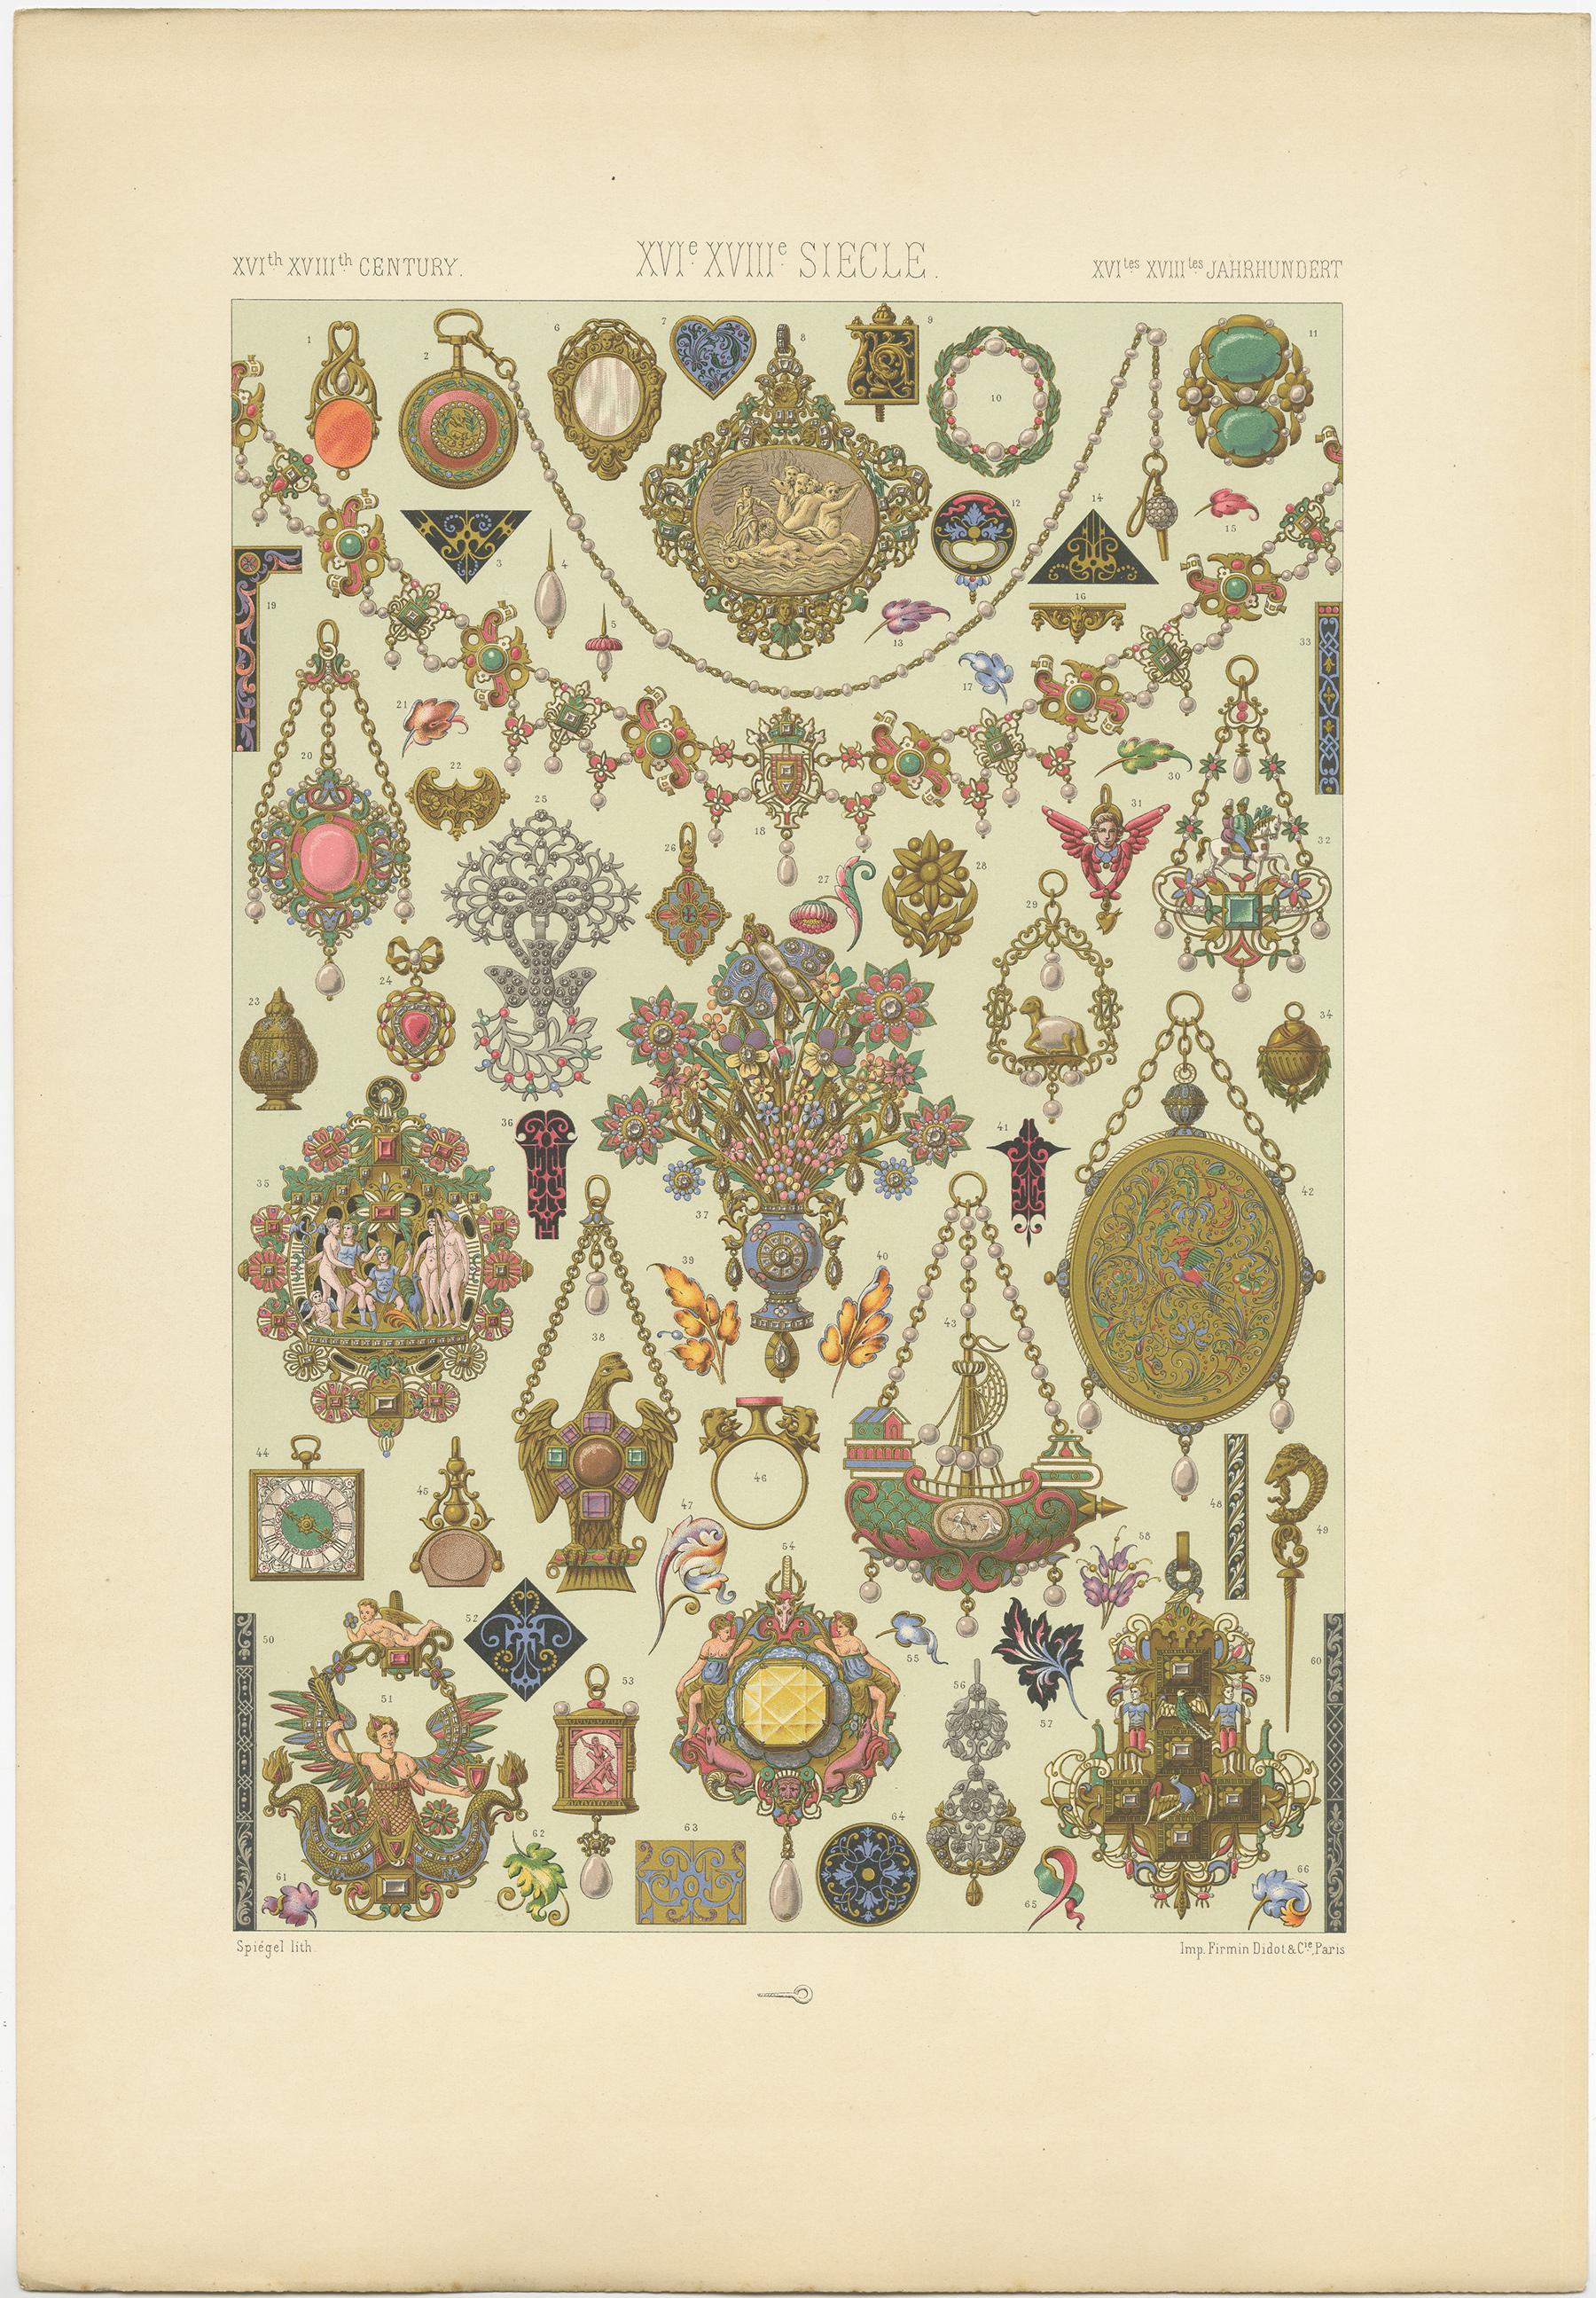 Antique print titled '16th Century - XVIc Siècle - XVILes Jahrhundert'. Chromolithograph of 15th-18th centuries jewelry ornaments. This print originates from 'l'Ornement Polychrome' by Auguste Racinet. Published circa 1890.